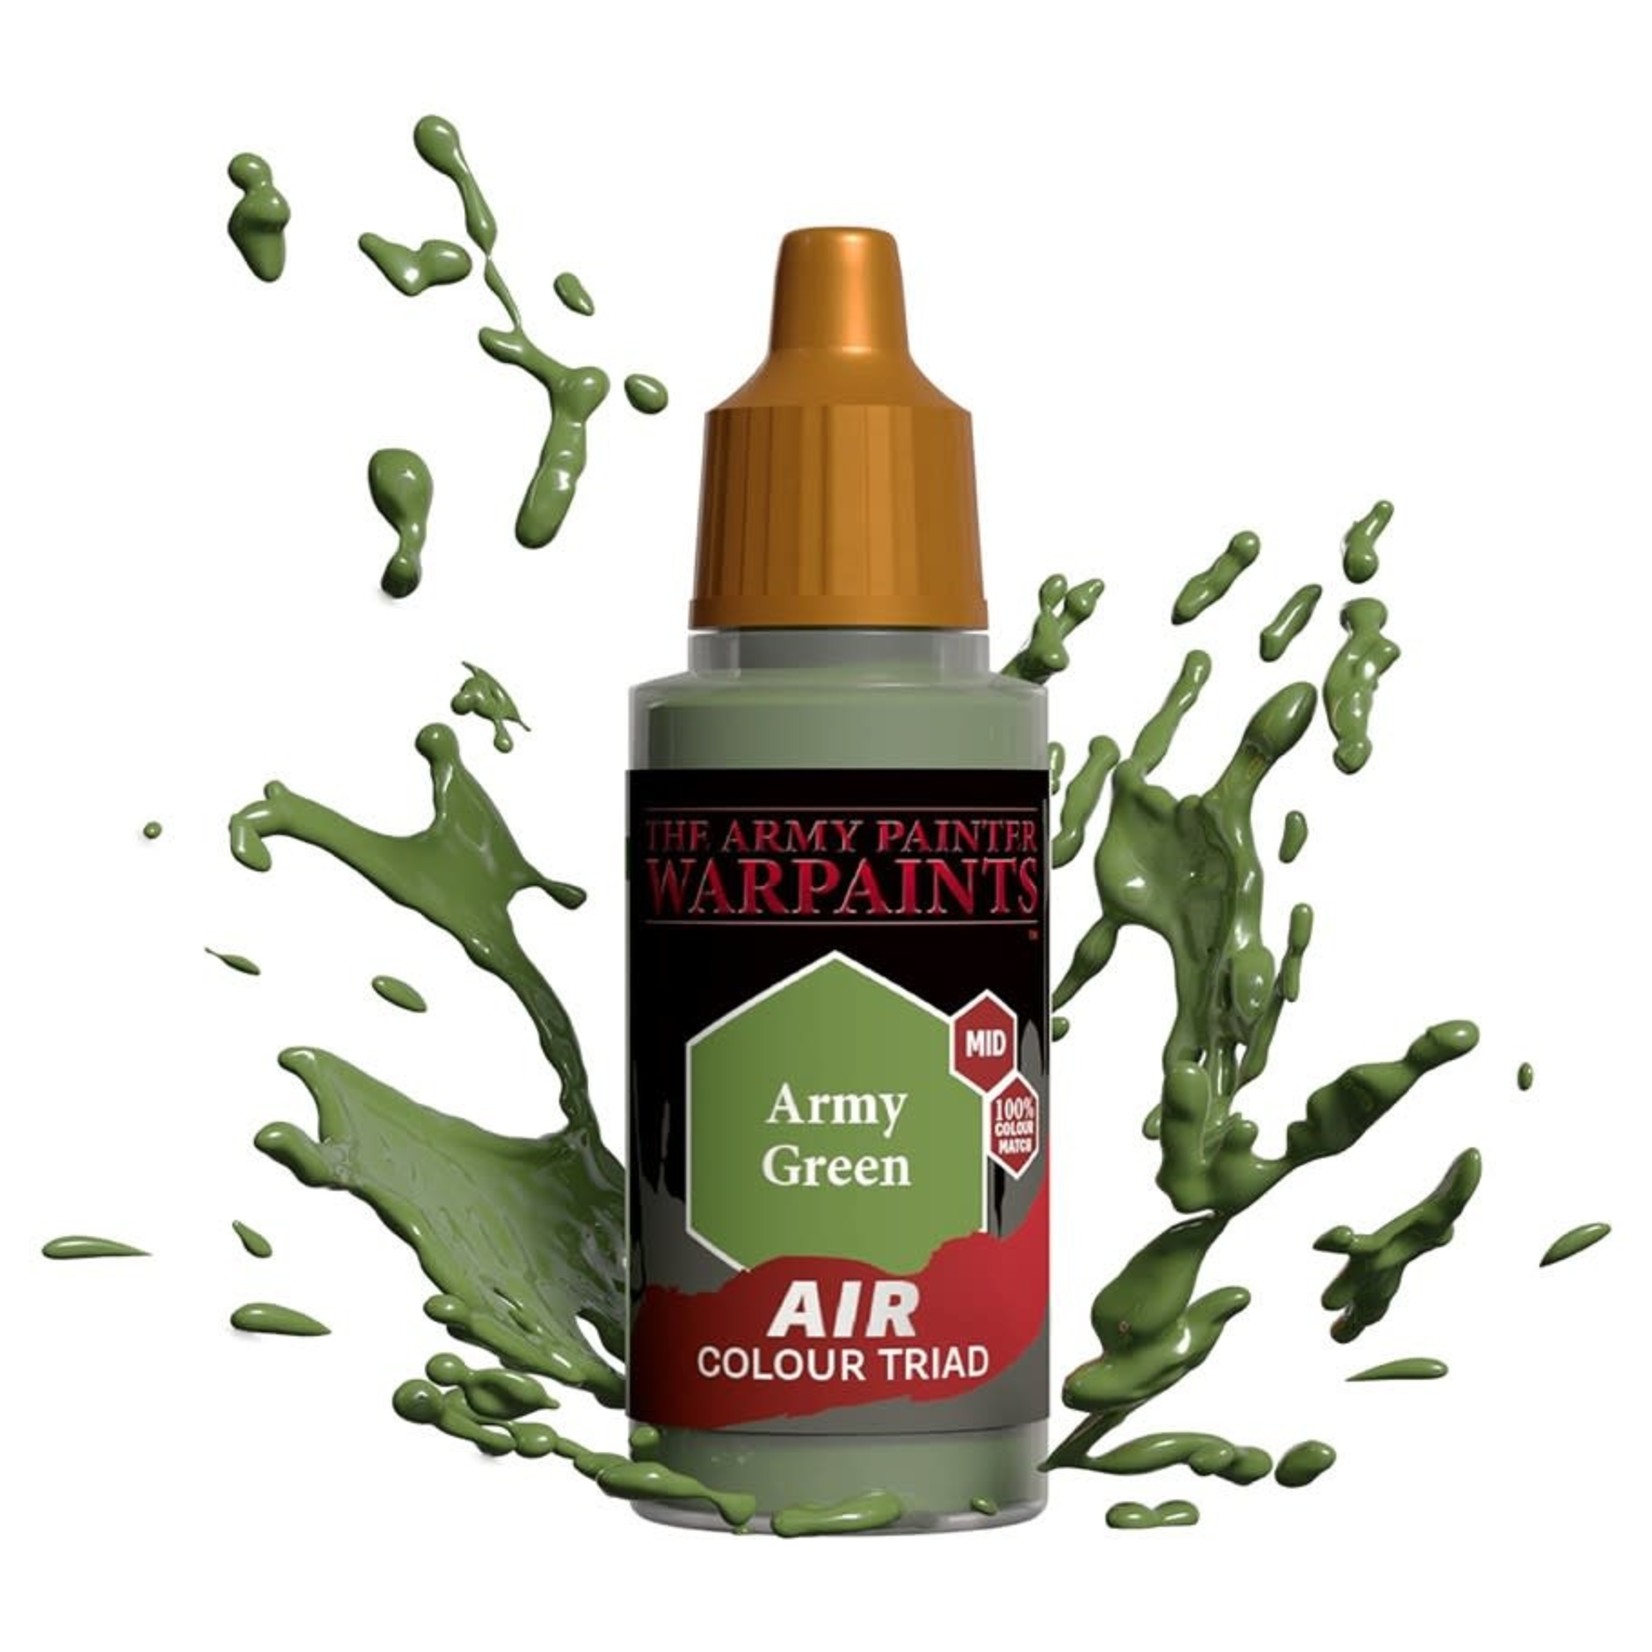 The Army Painter The Army Painter Army Green Air 18ml